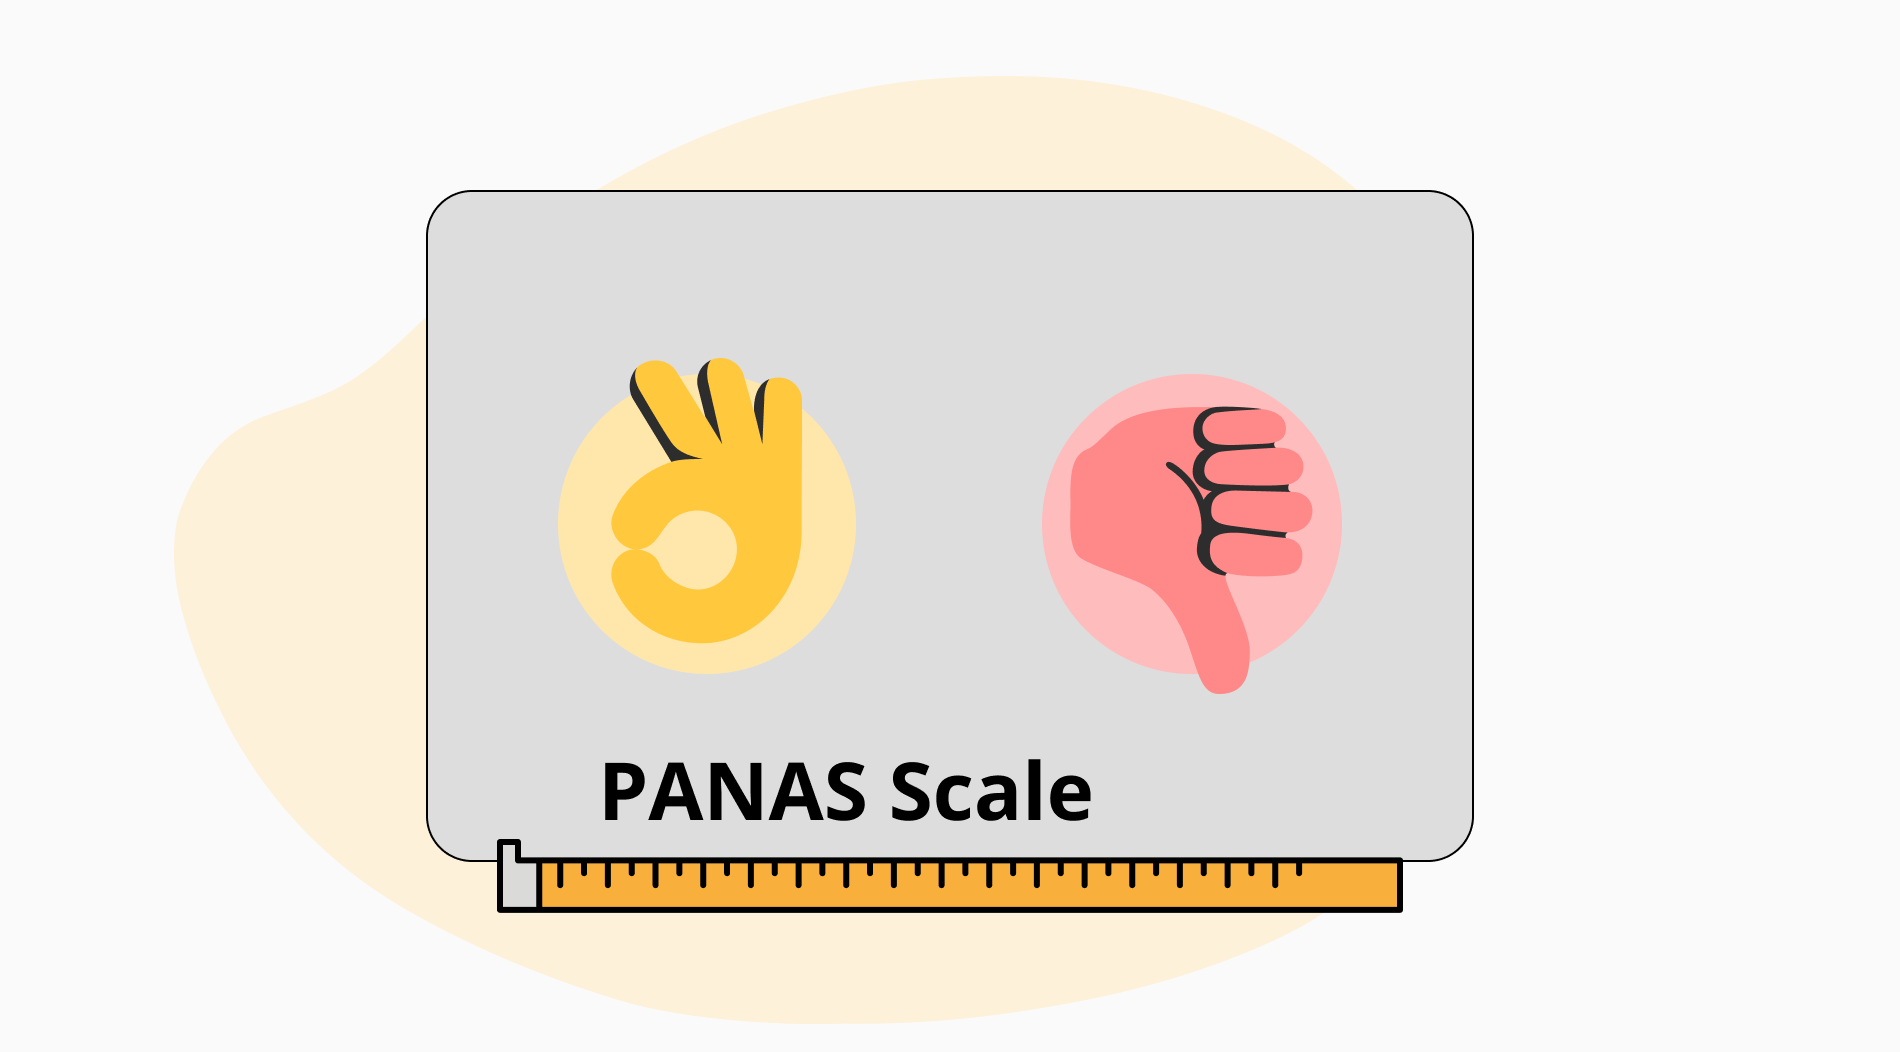 A Full guide to the PANAS scale